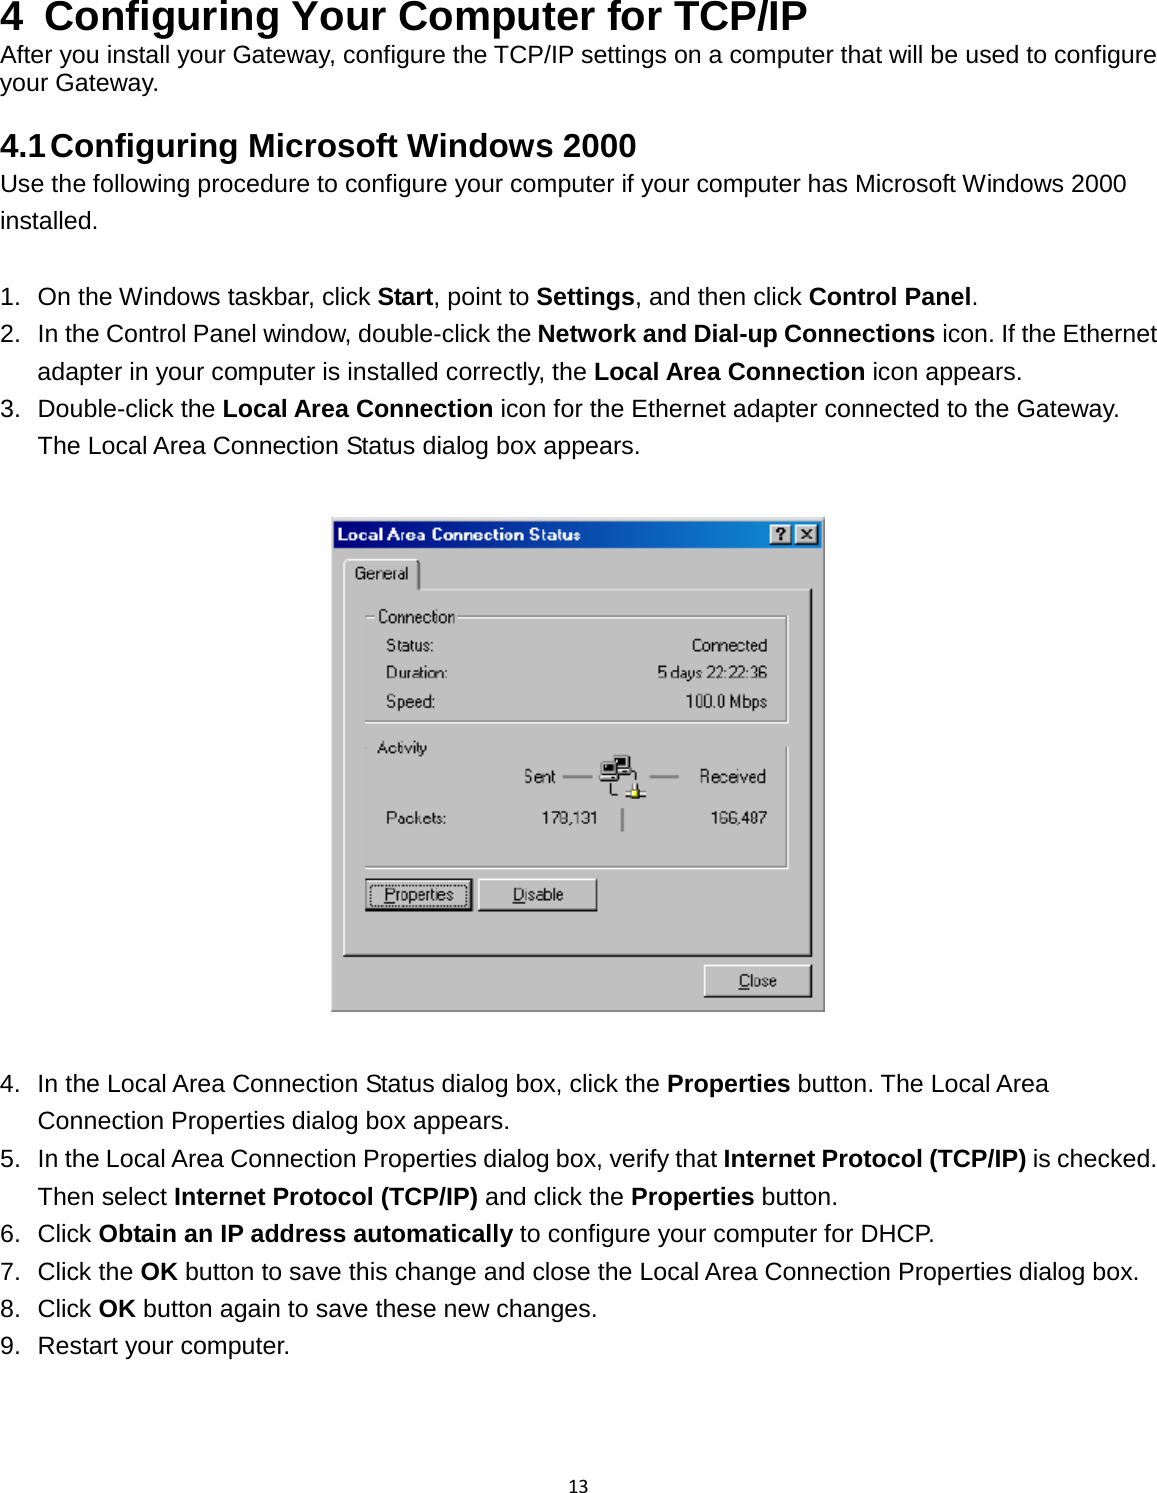 13  4  Configuring Your Computer for TCP/IP After you install your Gateway, configure the TCP/IP settings on a computer that will be used to configure your Gateway.  4.1 Configuring Microsoft Windows 2000 Use the following procedure to configure your computer if your computer has Microsoft Windows 2000 installed.  1. On the Windows taskbar, click Start, point to Settings, and then click Control Panel. 2. In the Control Panel window, double-click the Network and Dial-up Connections icon. If the Ethernet adapter in your computer is installed correctly, the Local Area Connection icon appears. 3. Double-click the Local Area Connection icon for the Ethernet adapter connected to the Gateway. The Local Area Connection Status dialog box appears.    4. In the Local Area Connection Status dialog box, click the Properties button. The Local Area Connection Properties dialog box appears. 5. In the Local Area Connection Properties dialog box, verify that Internet Protocol (TCP/IP) is checked. Then select Internet Protocol (TCP/IP) and click the Properties button. 6. Click Obtain an IP address automatically to configure your computer for DHCP. 7. Click the OK button to save this change and close the Local Area Connection Properties dialog box. 8. Click OK button again to save these new changes. 9. Restart your computer.  